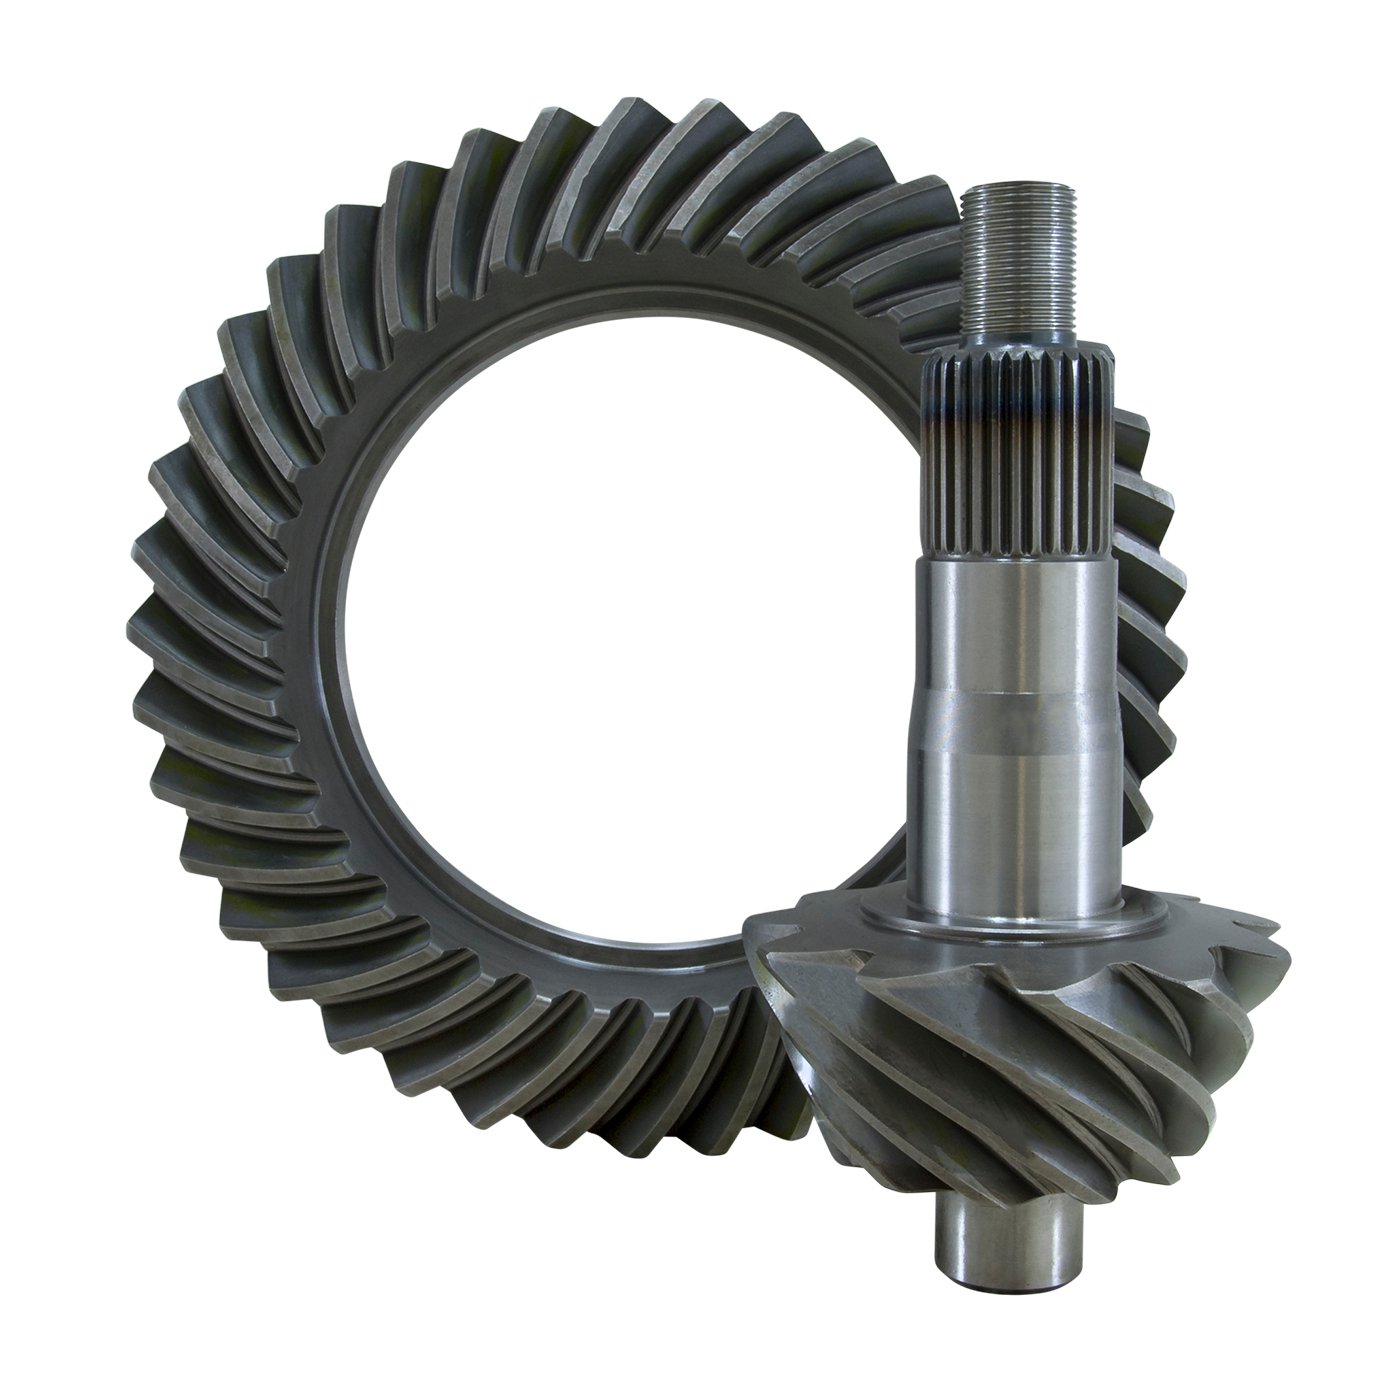 USA Standard 36183 Ring & Pinion Gear Set, For 10.5 in. GM 14 Bolt Truck, 4.11 Ratio